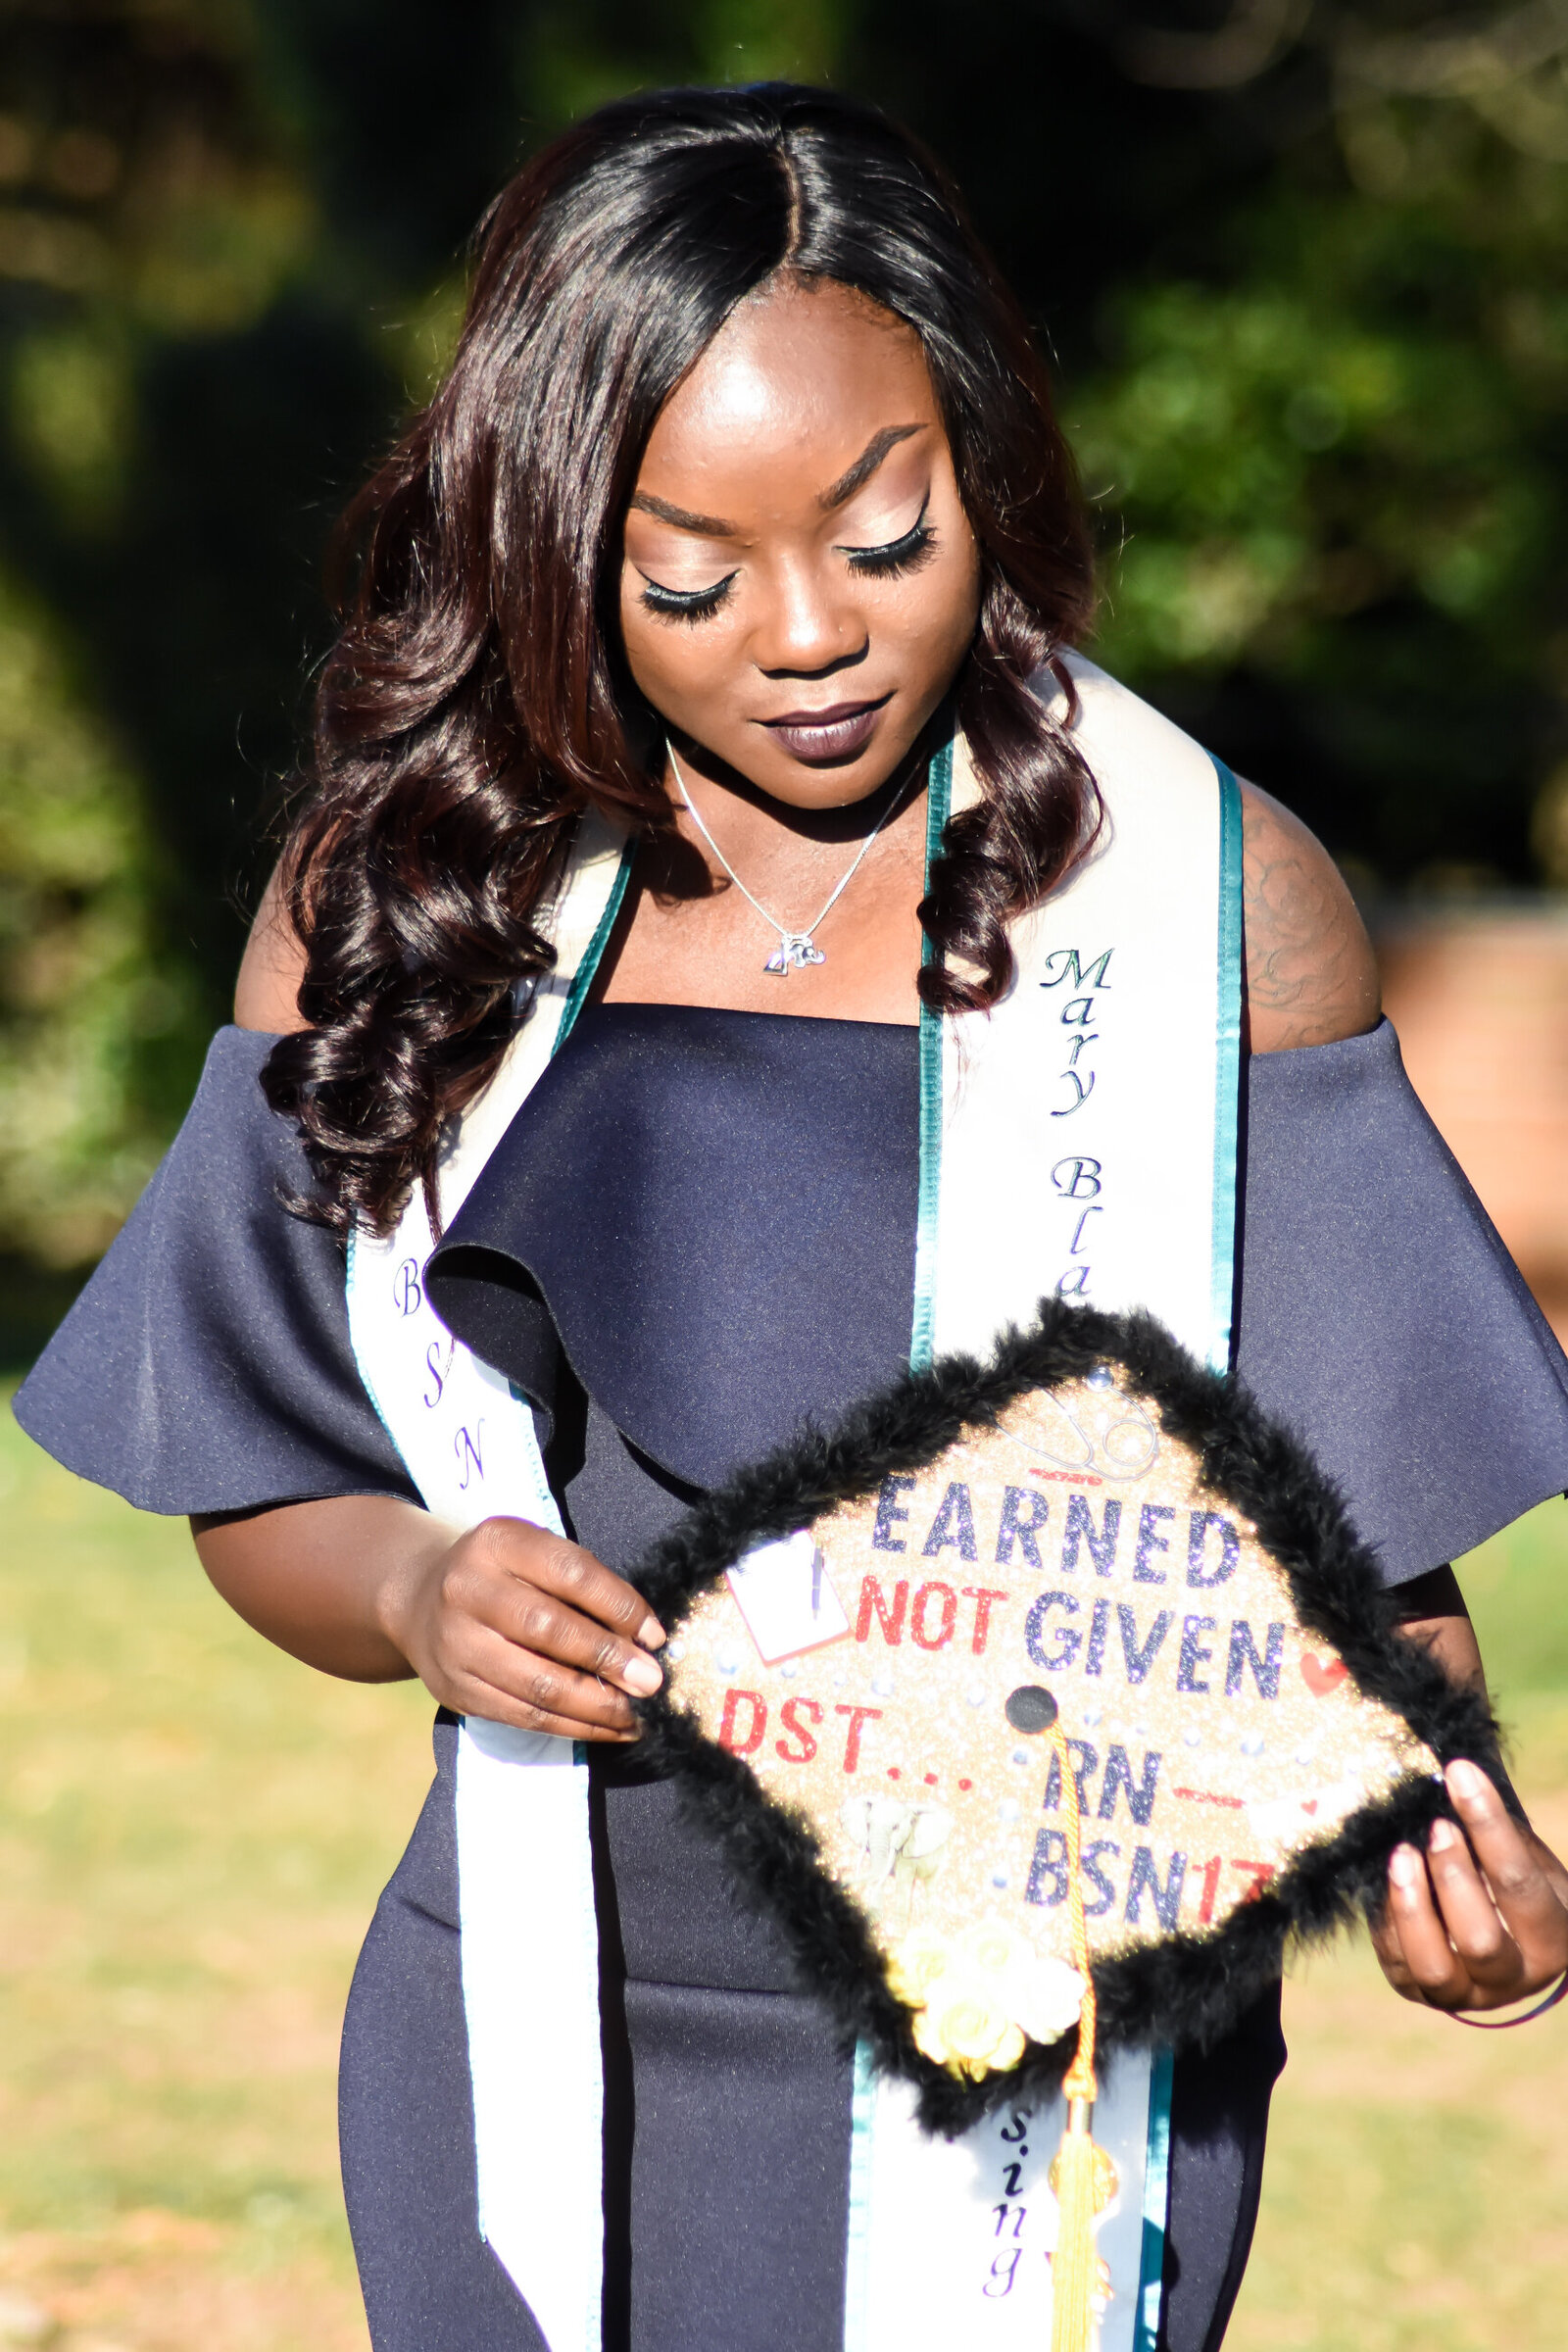 a graduate wearing her green and white stole holding a custom graduation cap that reads "earned, not given. DST, RN, BSN". photographed by Millz Photography in Greenville, SC